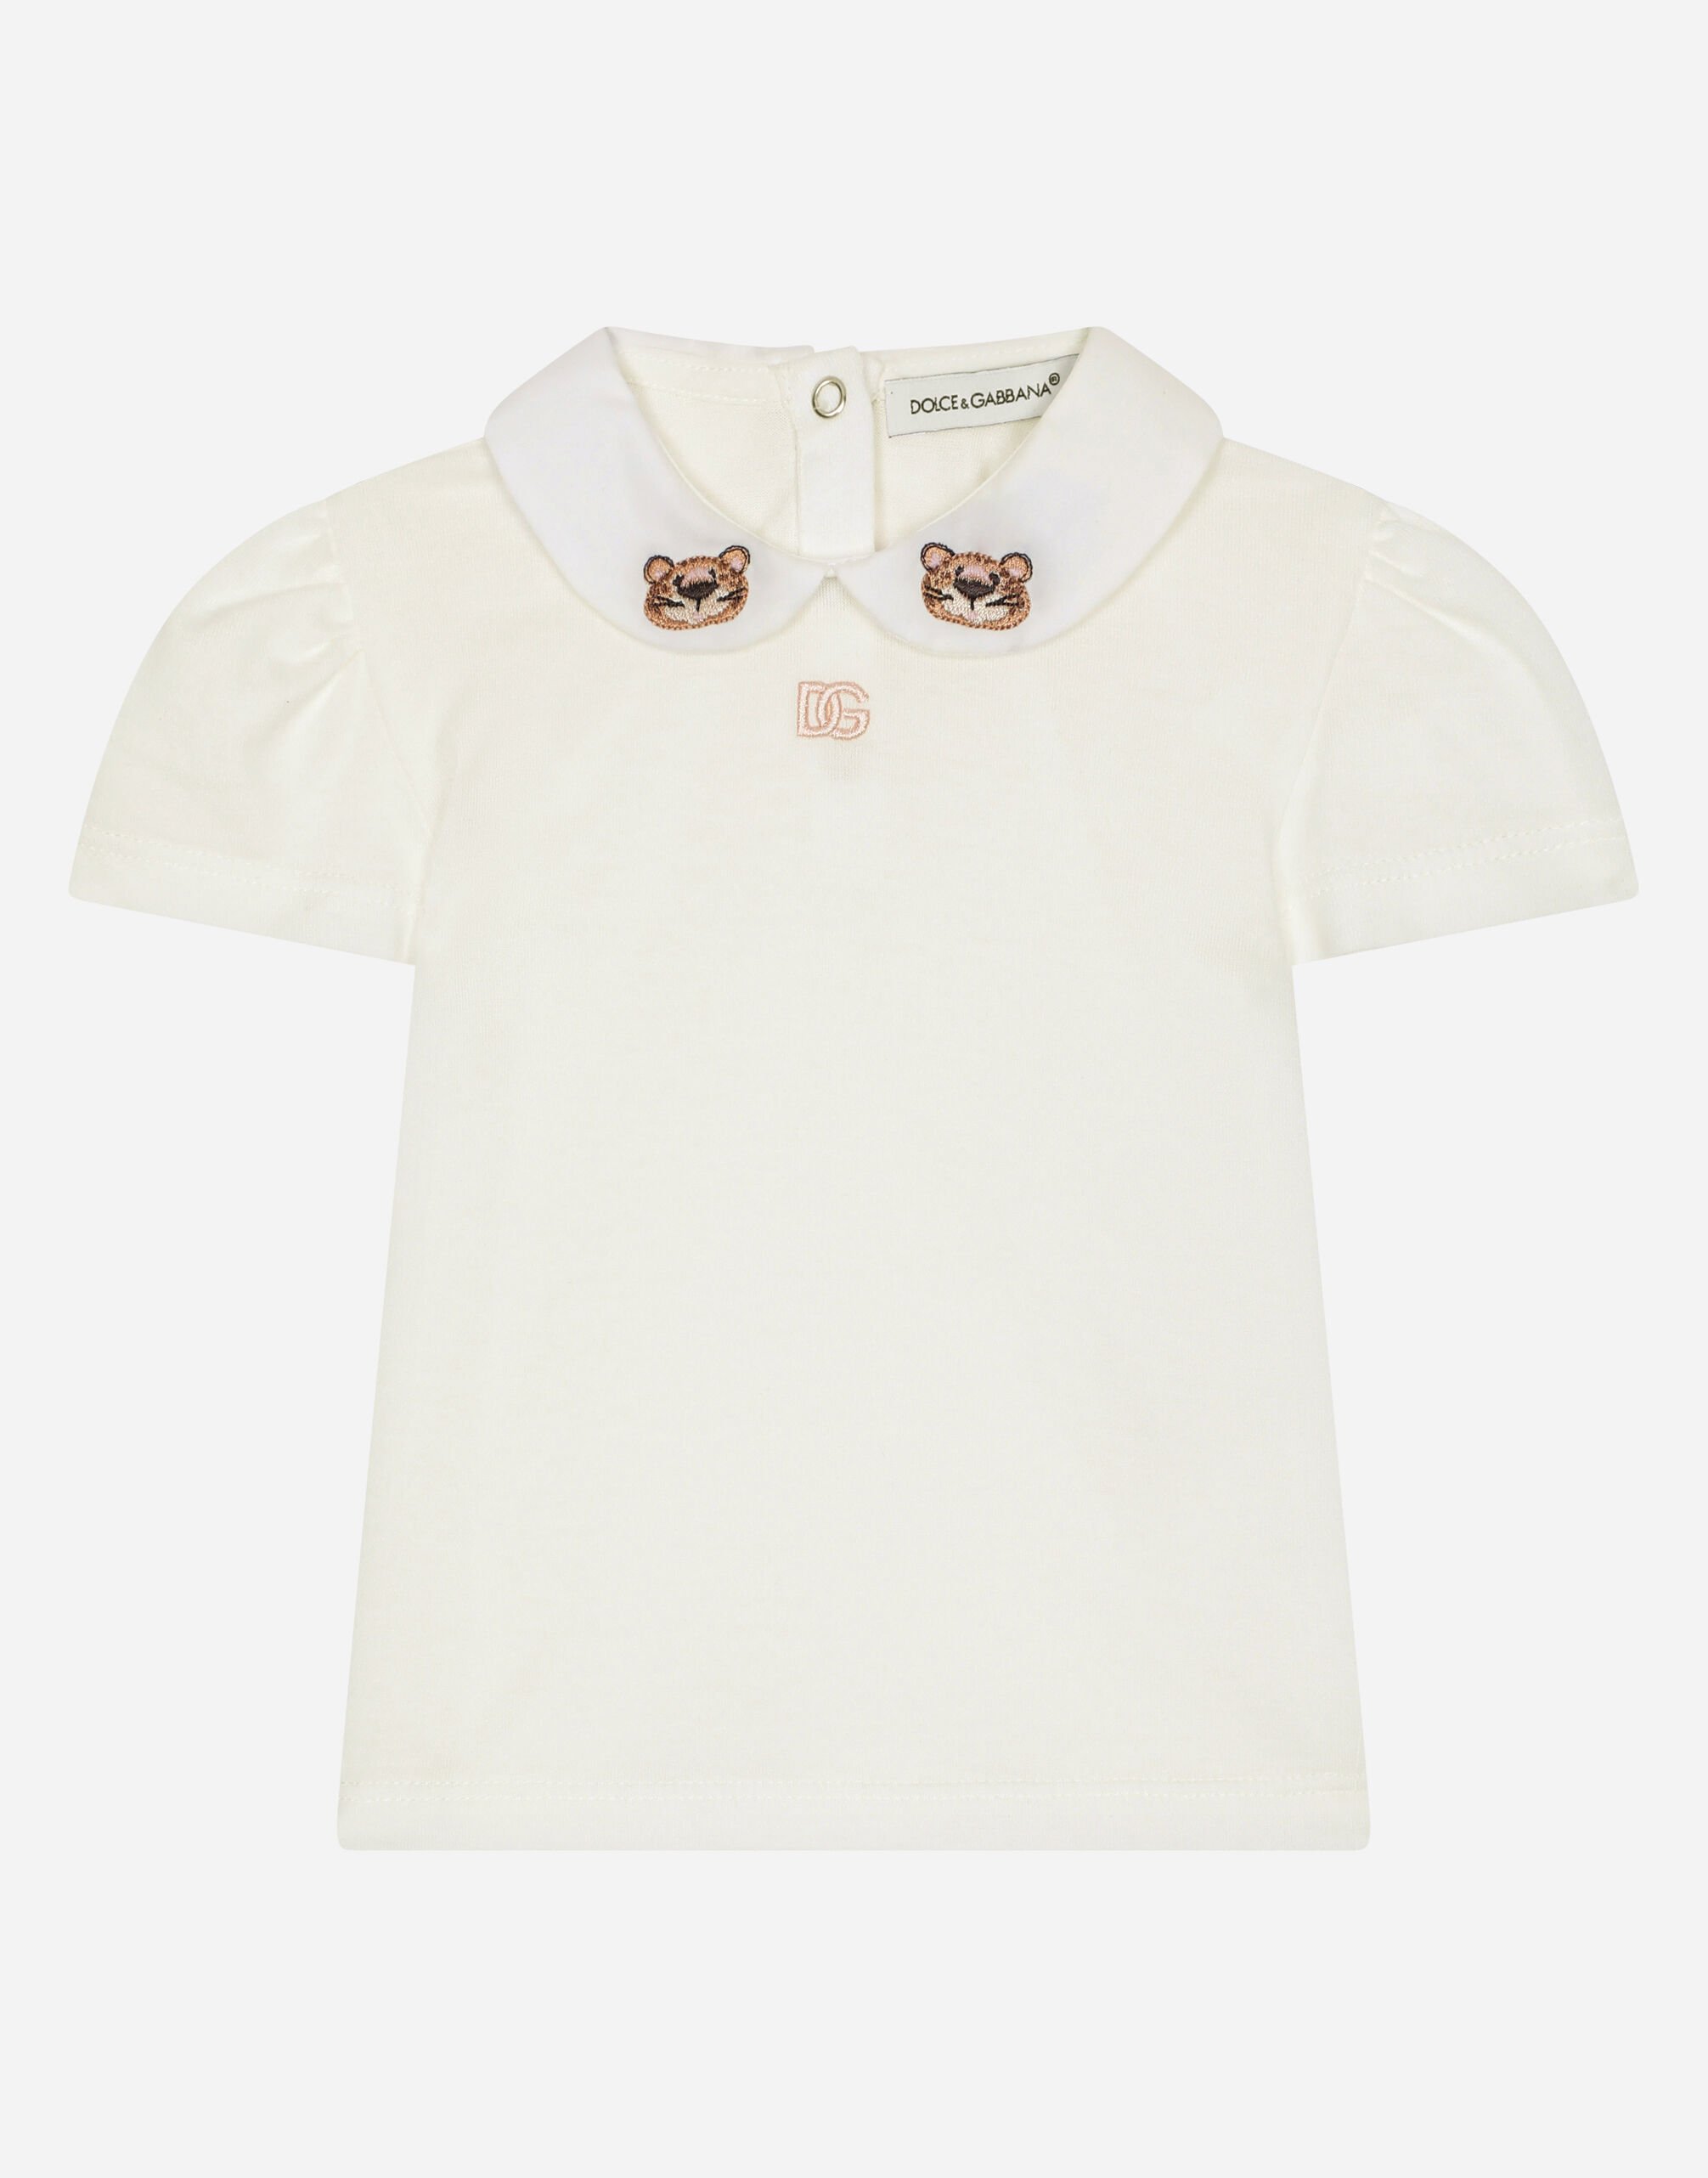 Dolce & Gabbana Jersey T-shirt with baby leopard embroidery Black EB0003AB000